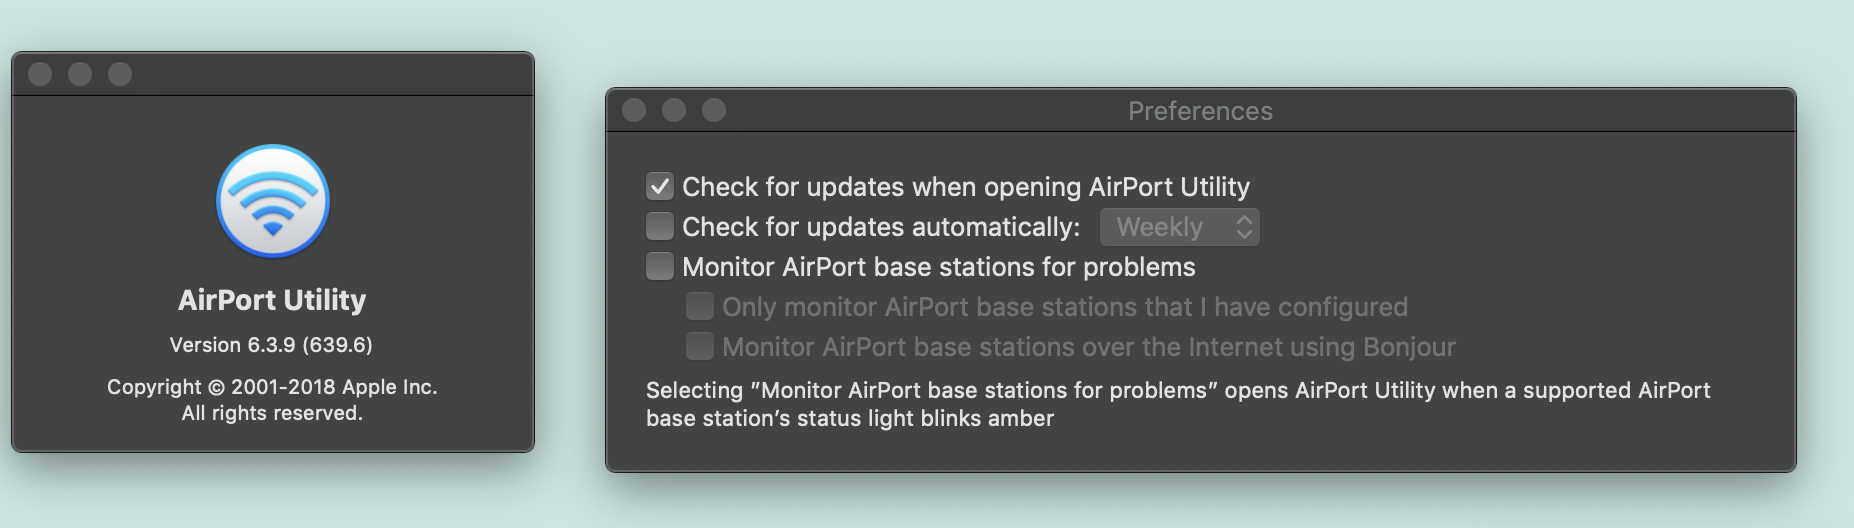 Airport Express unstable connection - Apple Community